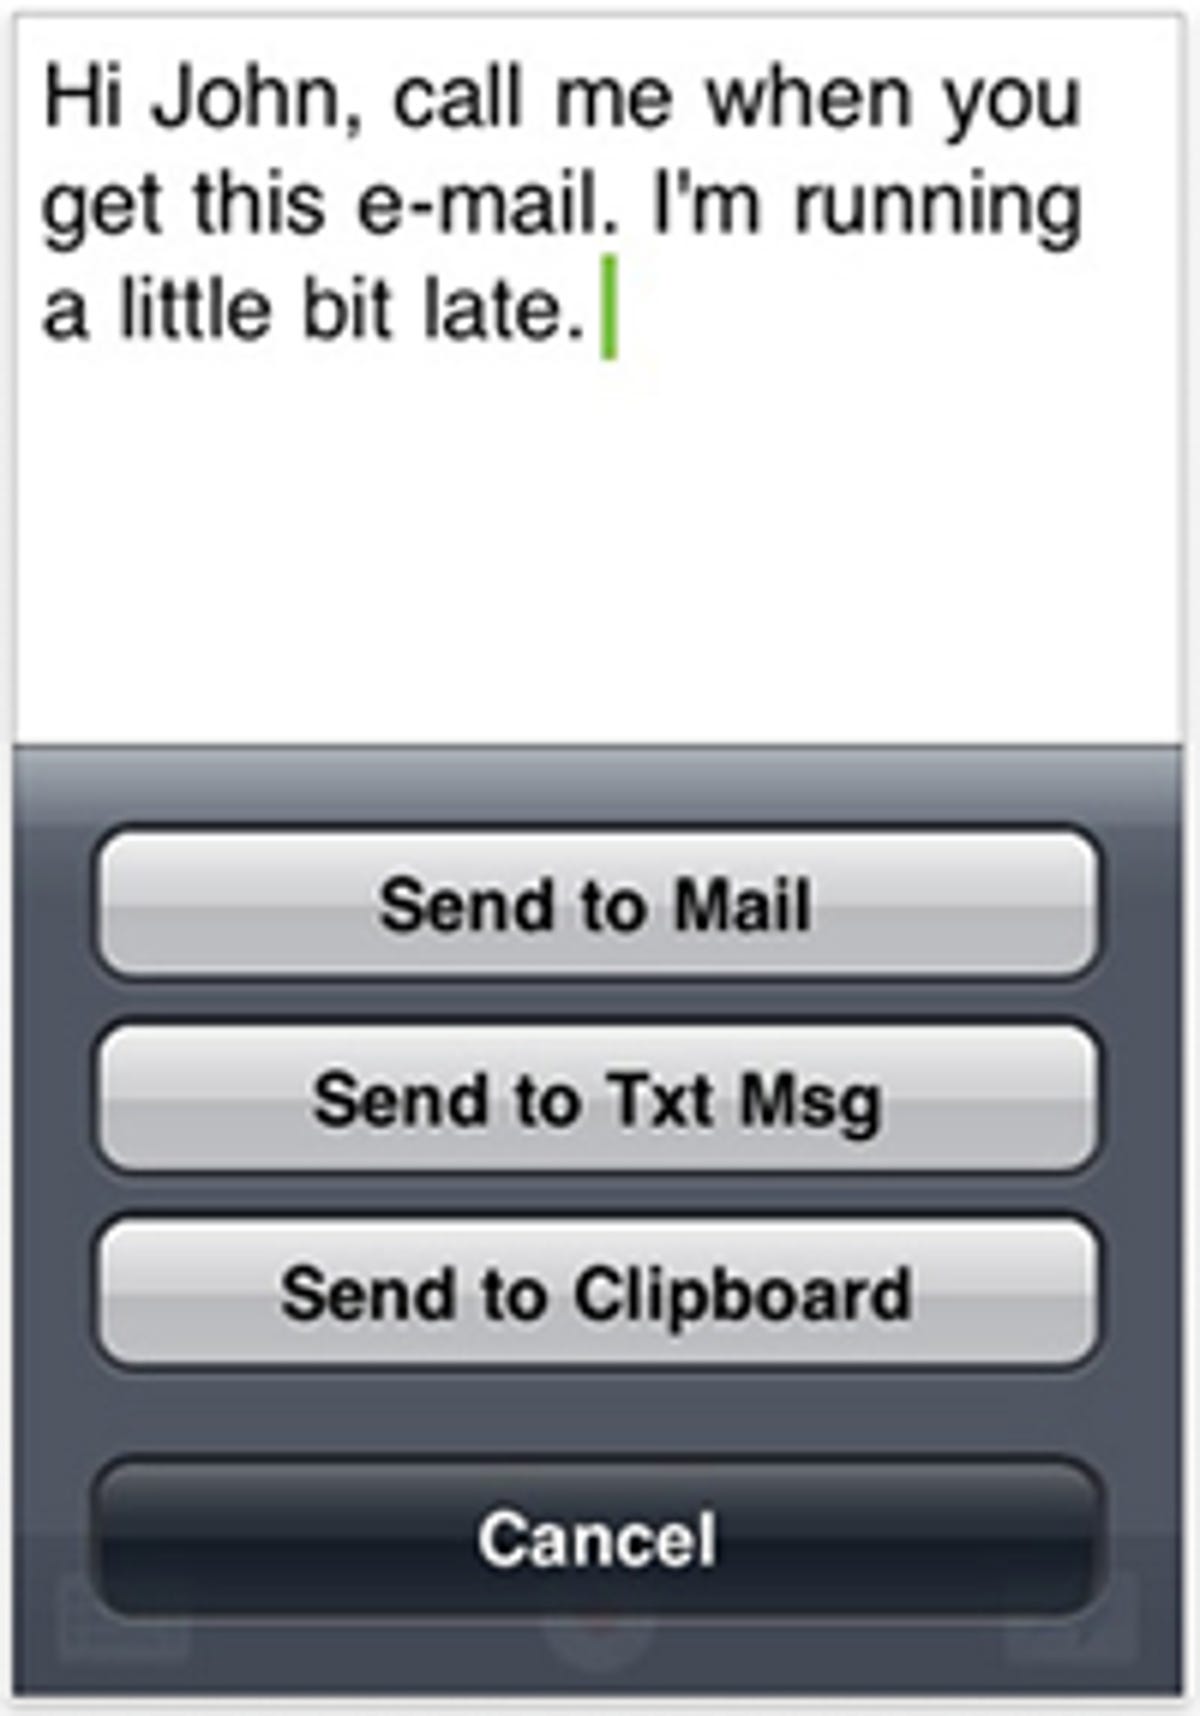 Dragon Dictation for the iPhone and iPod Touch